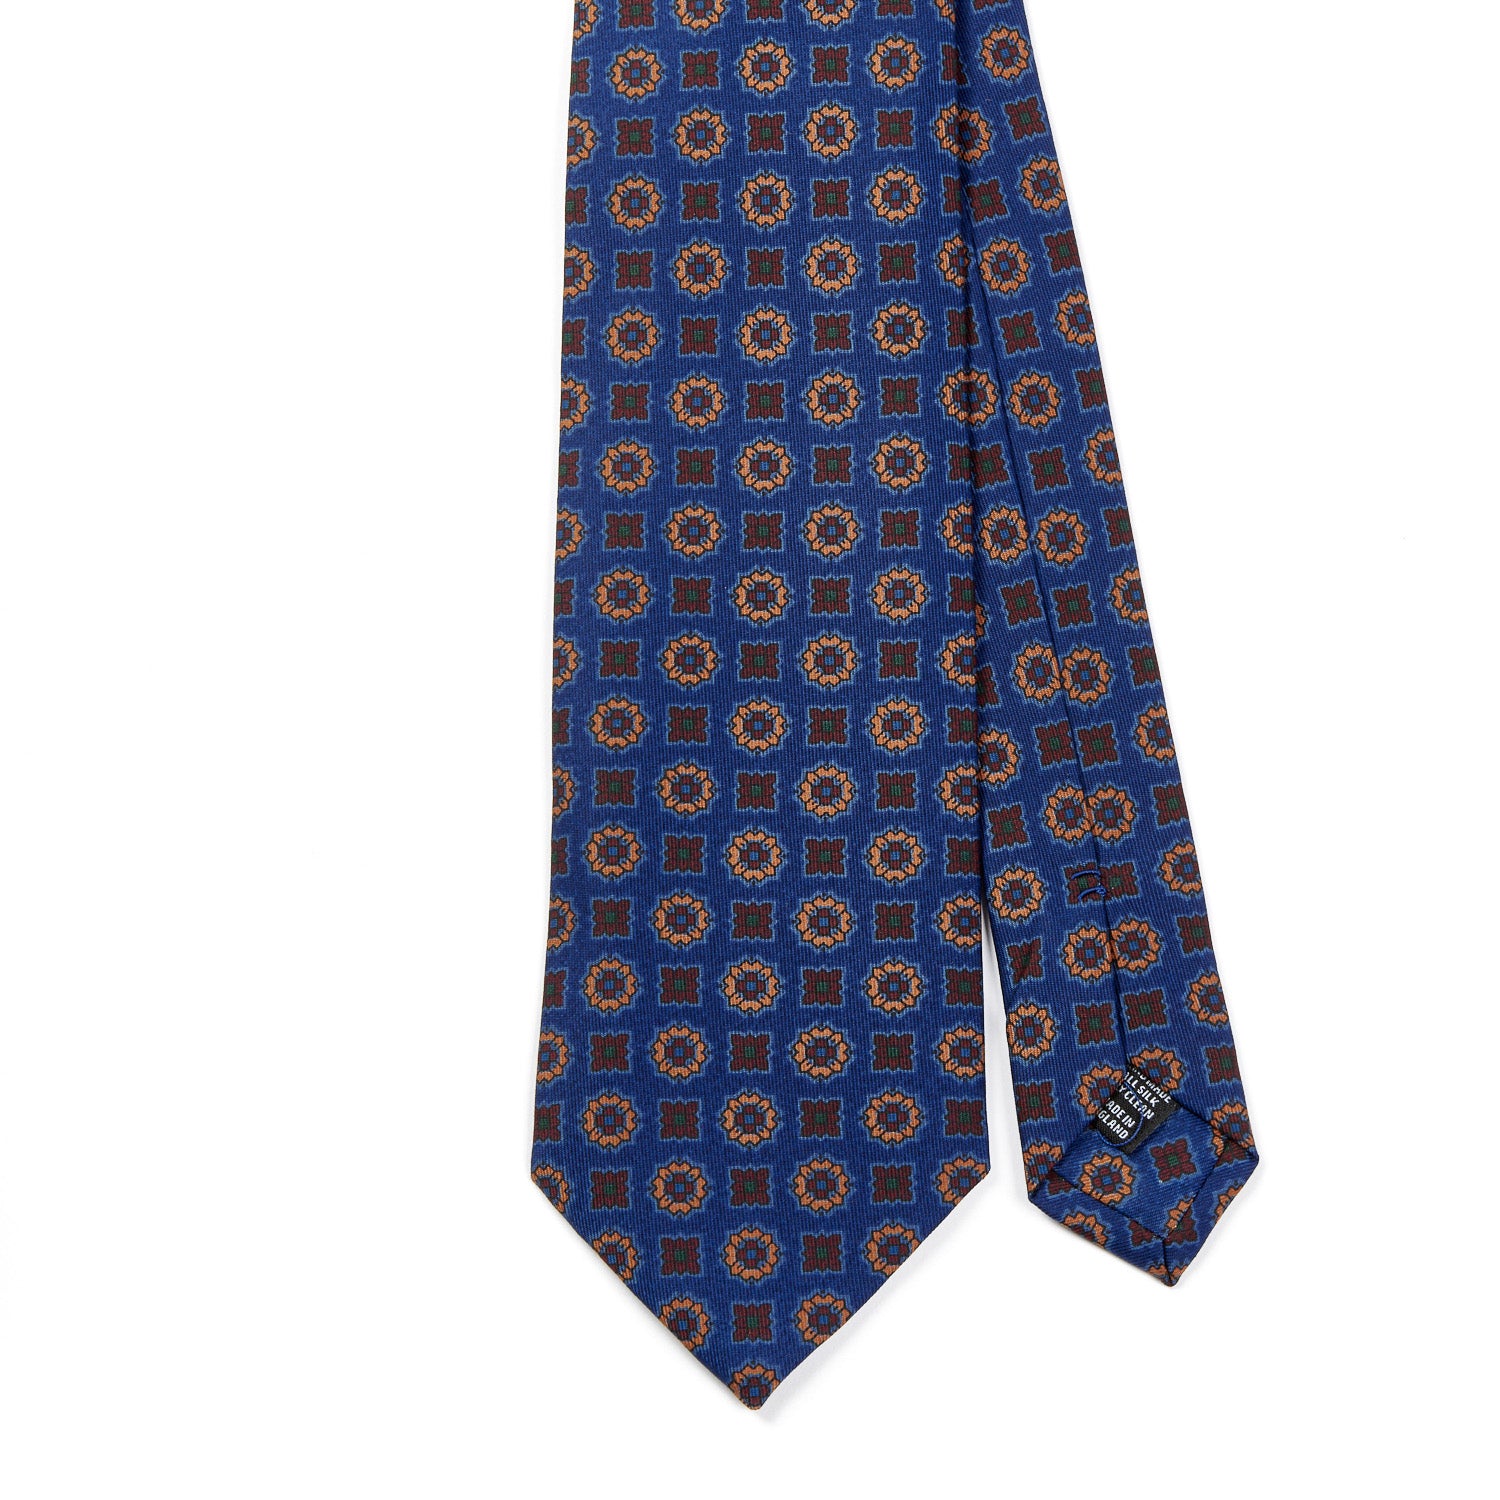 A high-quality Sovereign Grade Blue Floral Diamond Ancient Madder tie by KirbyAllison.com with a geometric pattern.